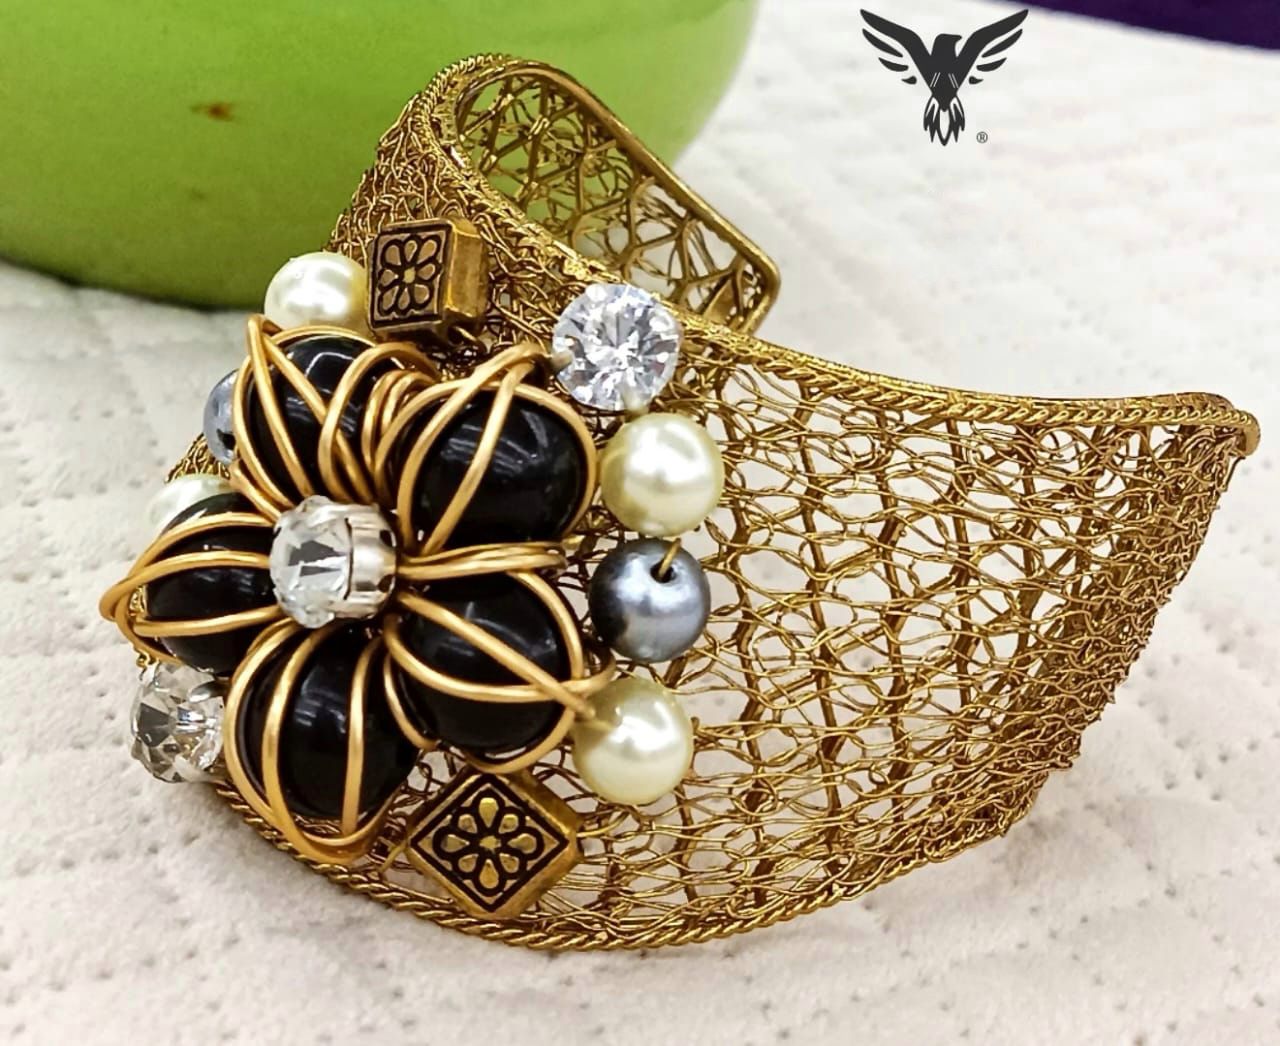 Aagasthya Gold Plated Black Beaded Floral Duzy Bracelet For Women